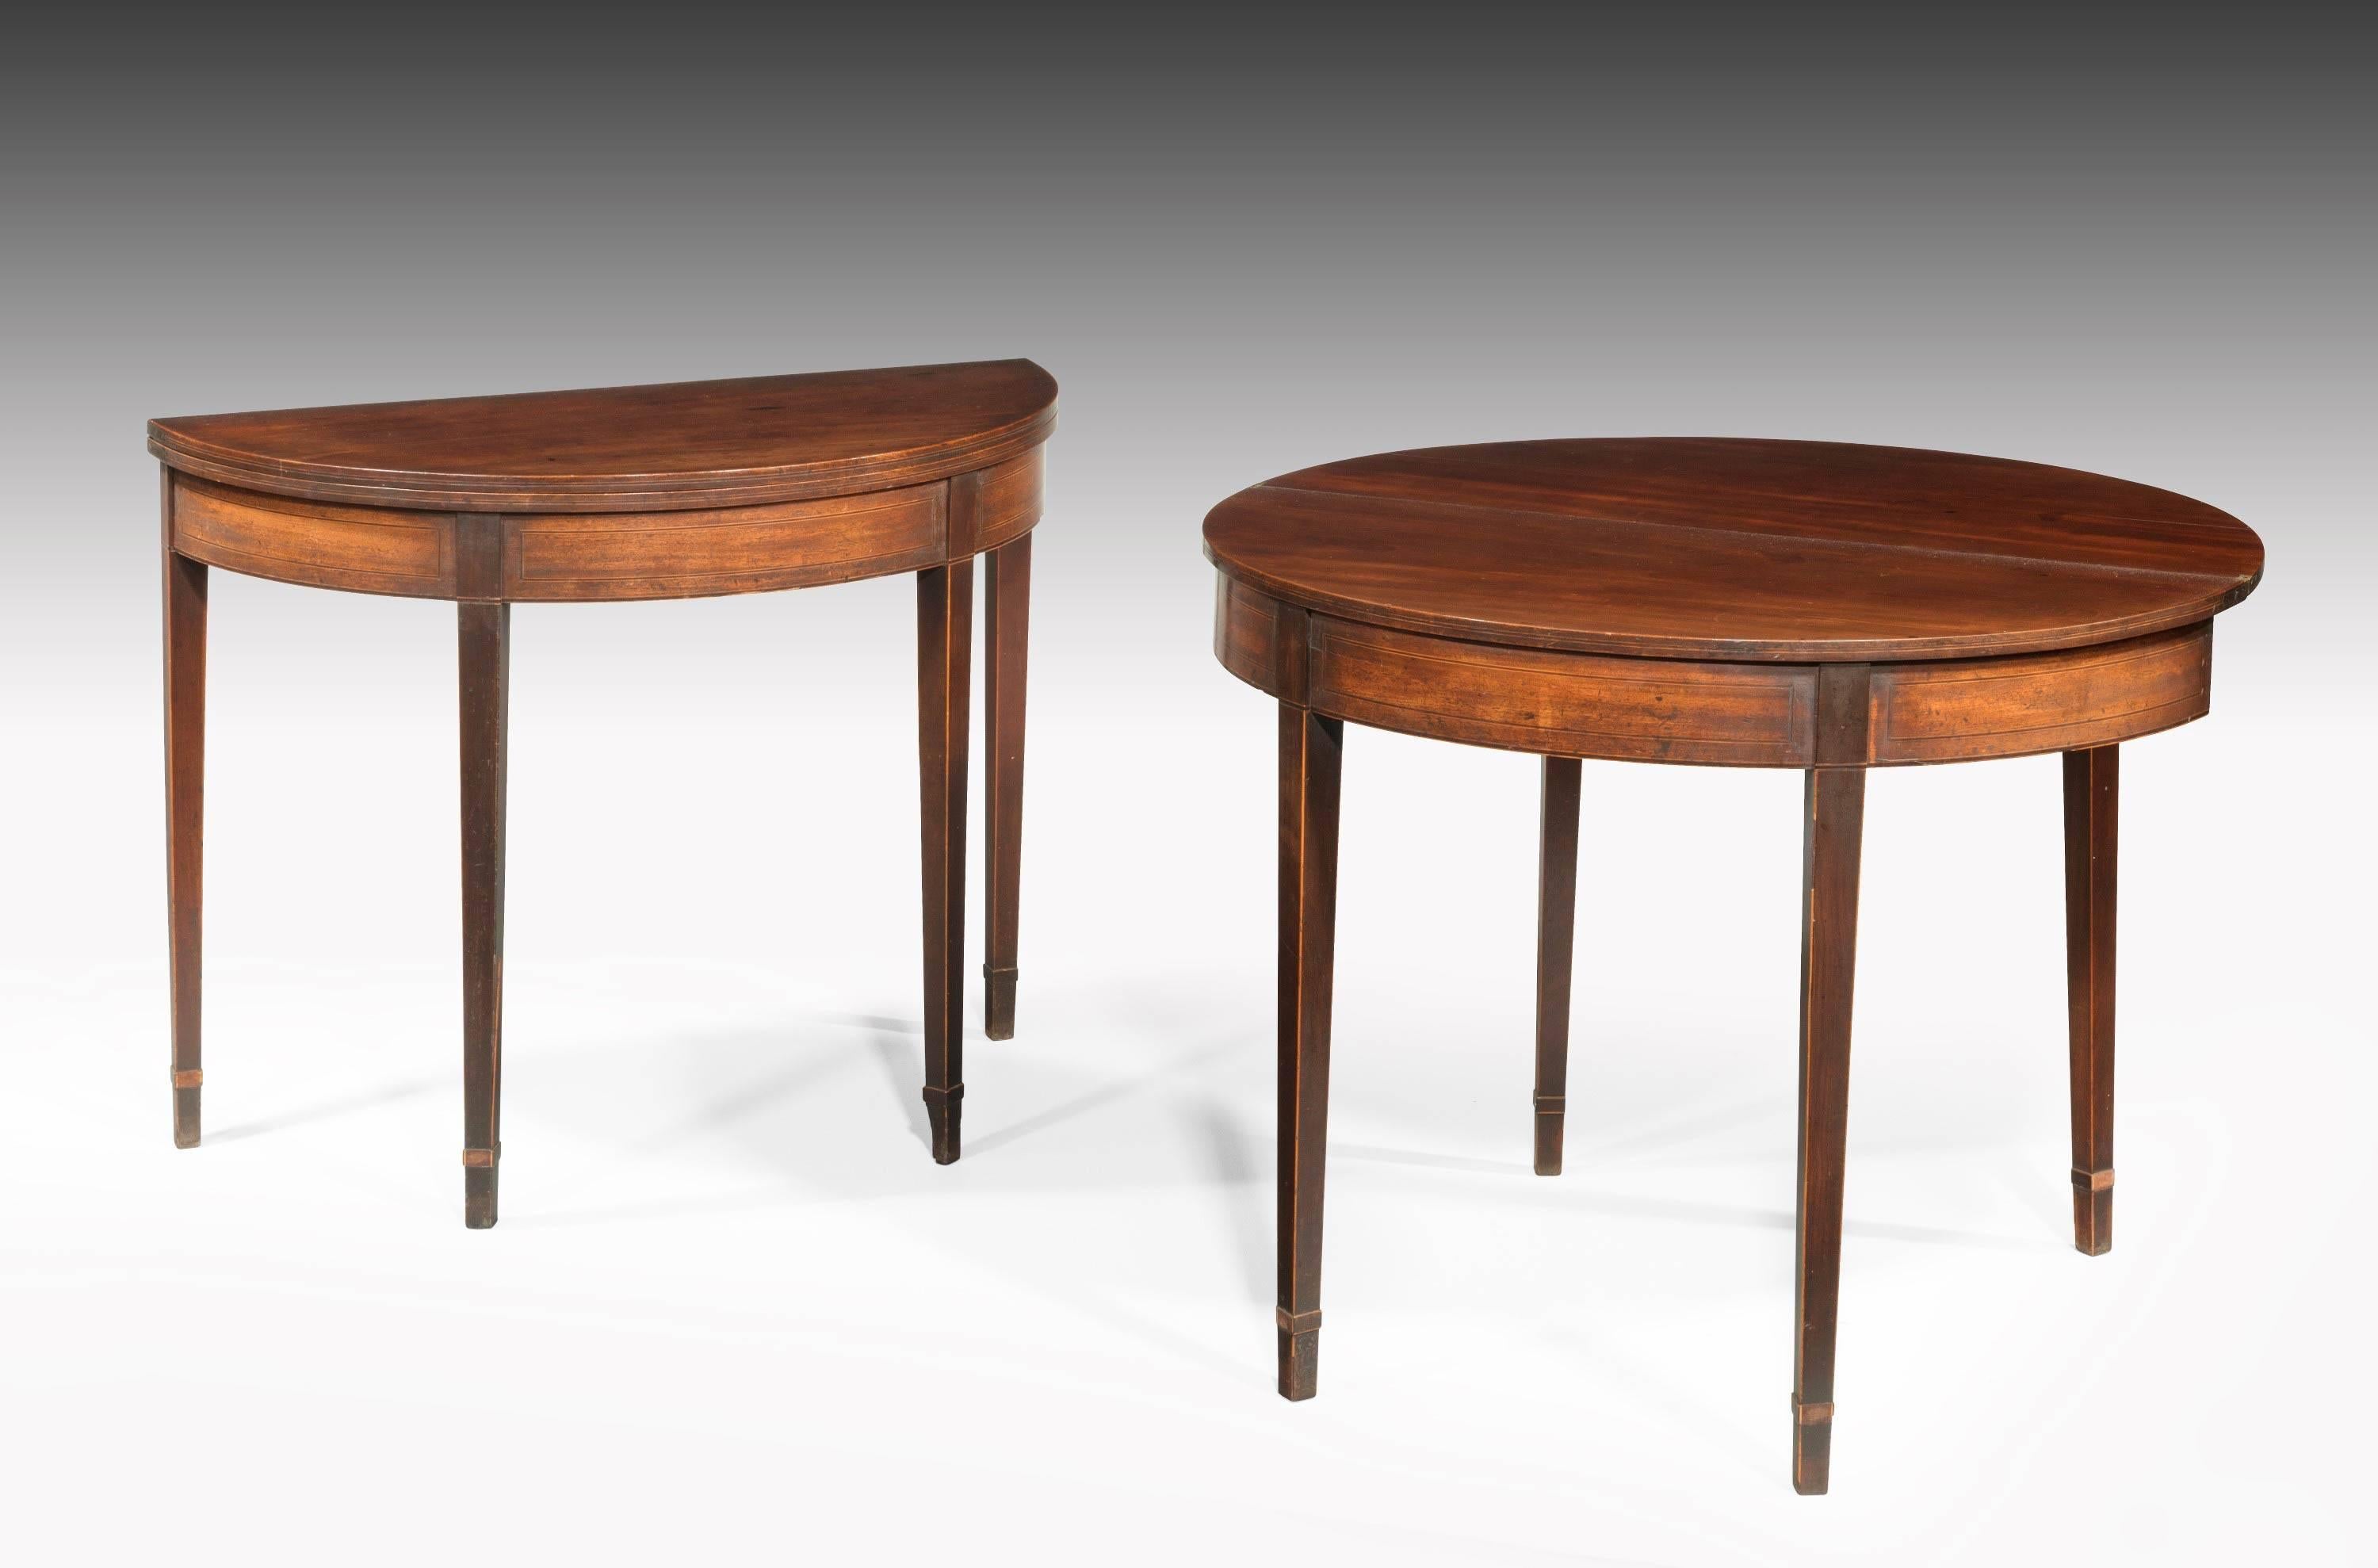 A good and original pair of George III period mahogany demilune card tables. On square tapering supports with banded shoe feet. Fine line inlay to the top and bow front sections. 

When open the width is 35 inches.